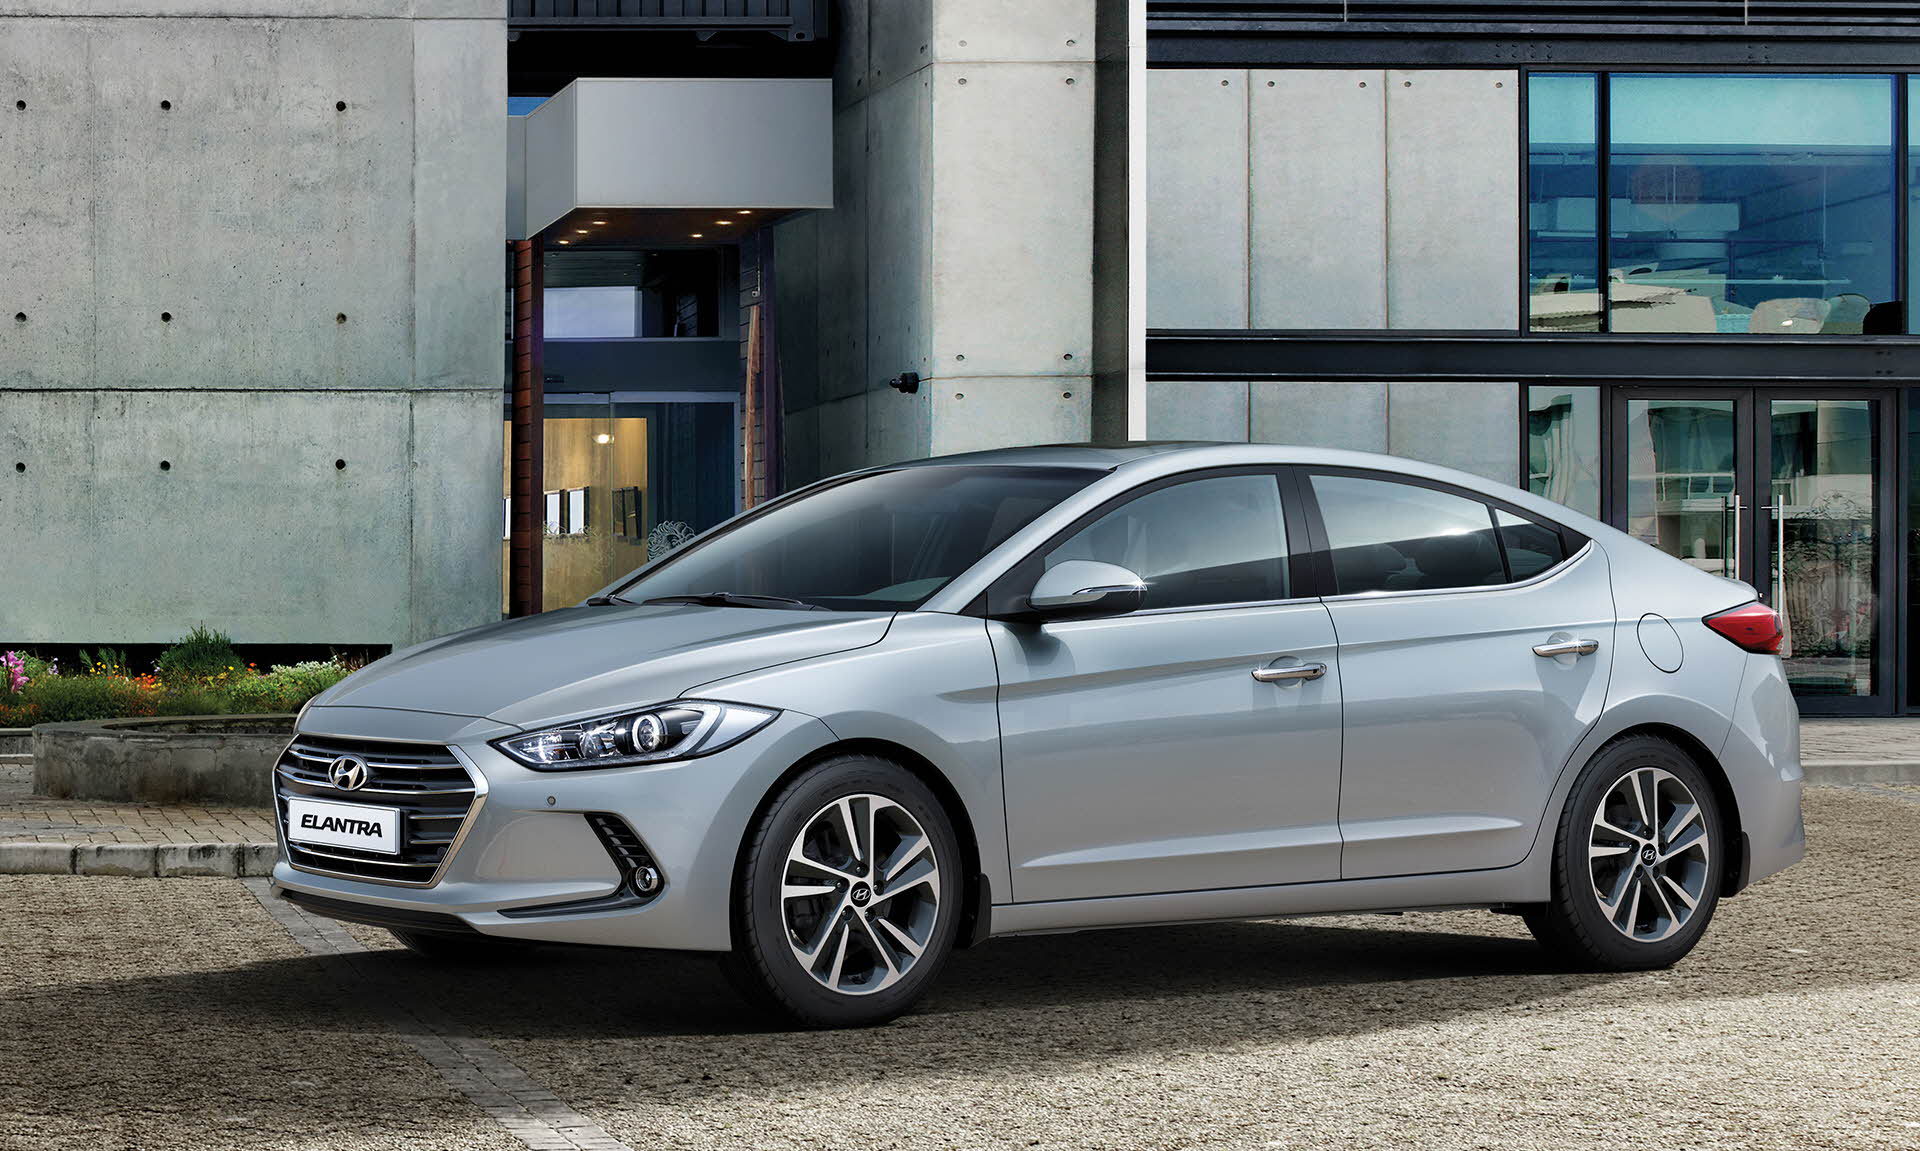 2016 Hyundai Elantra to be Launched in India on August 23